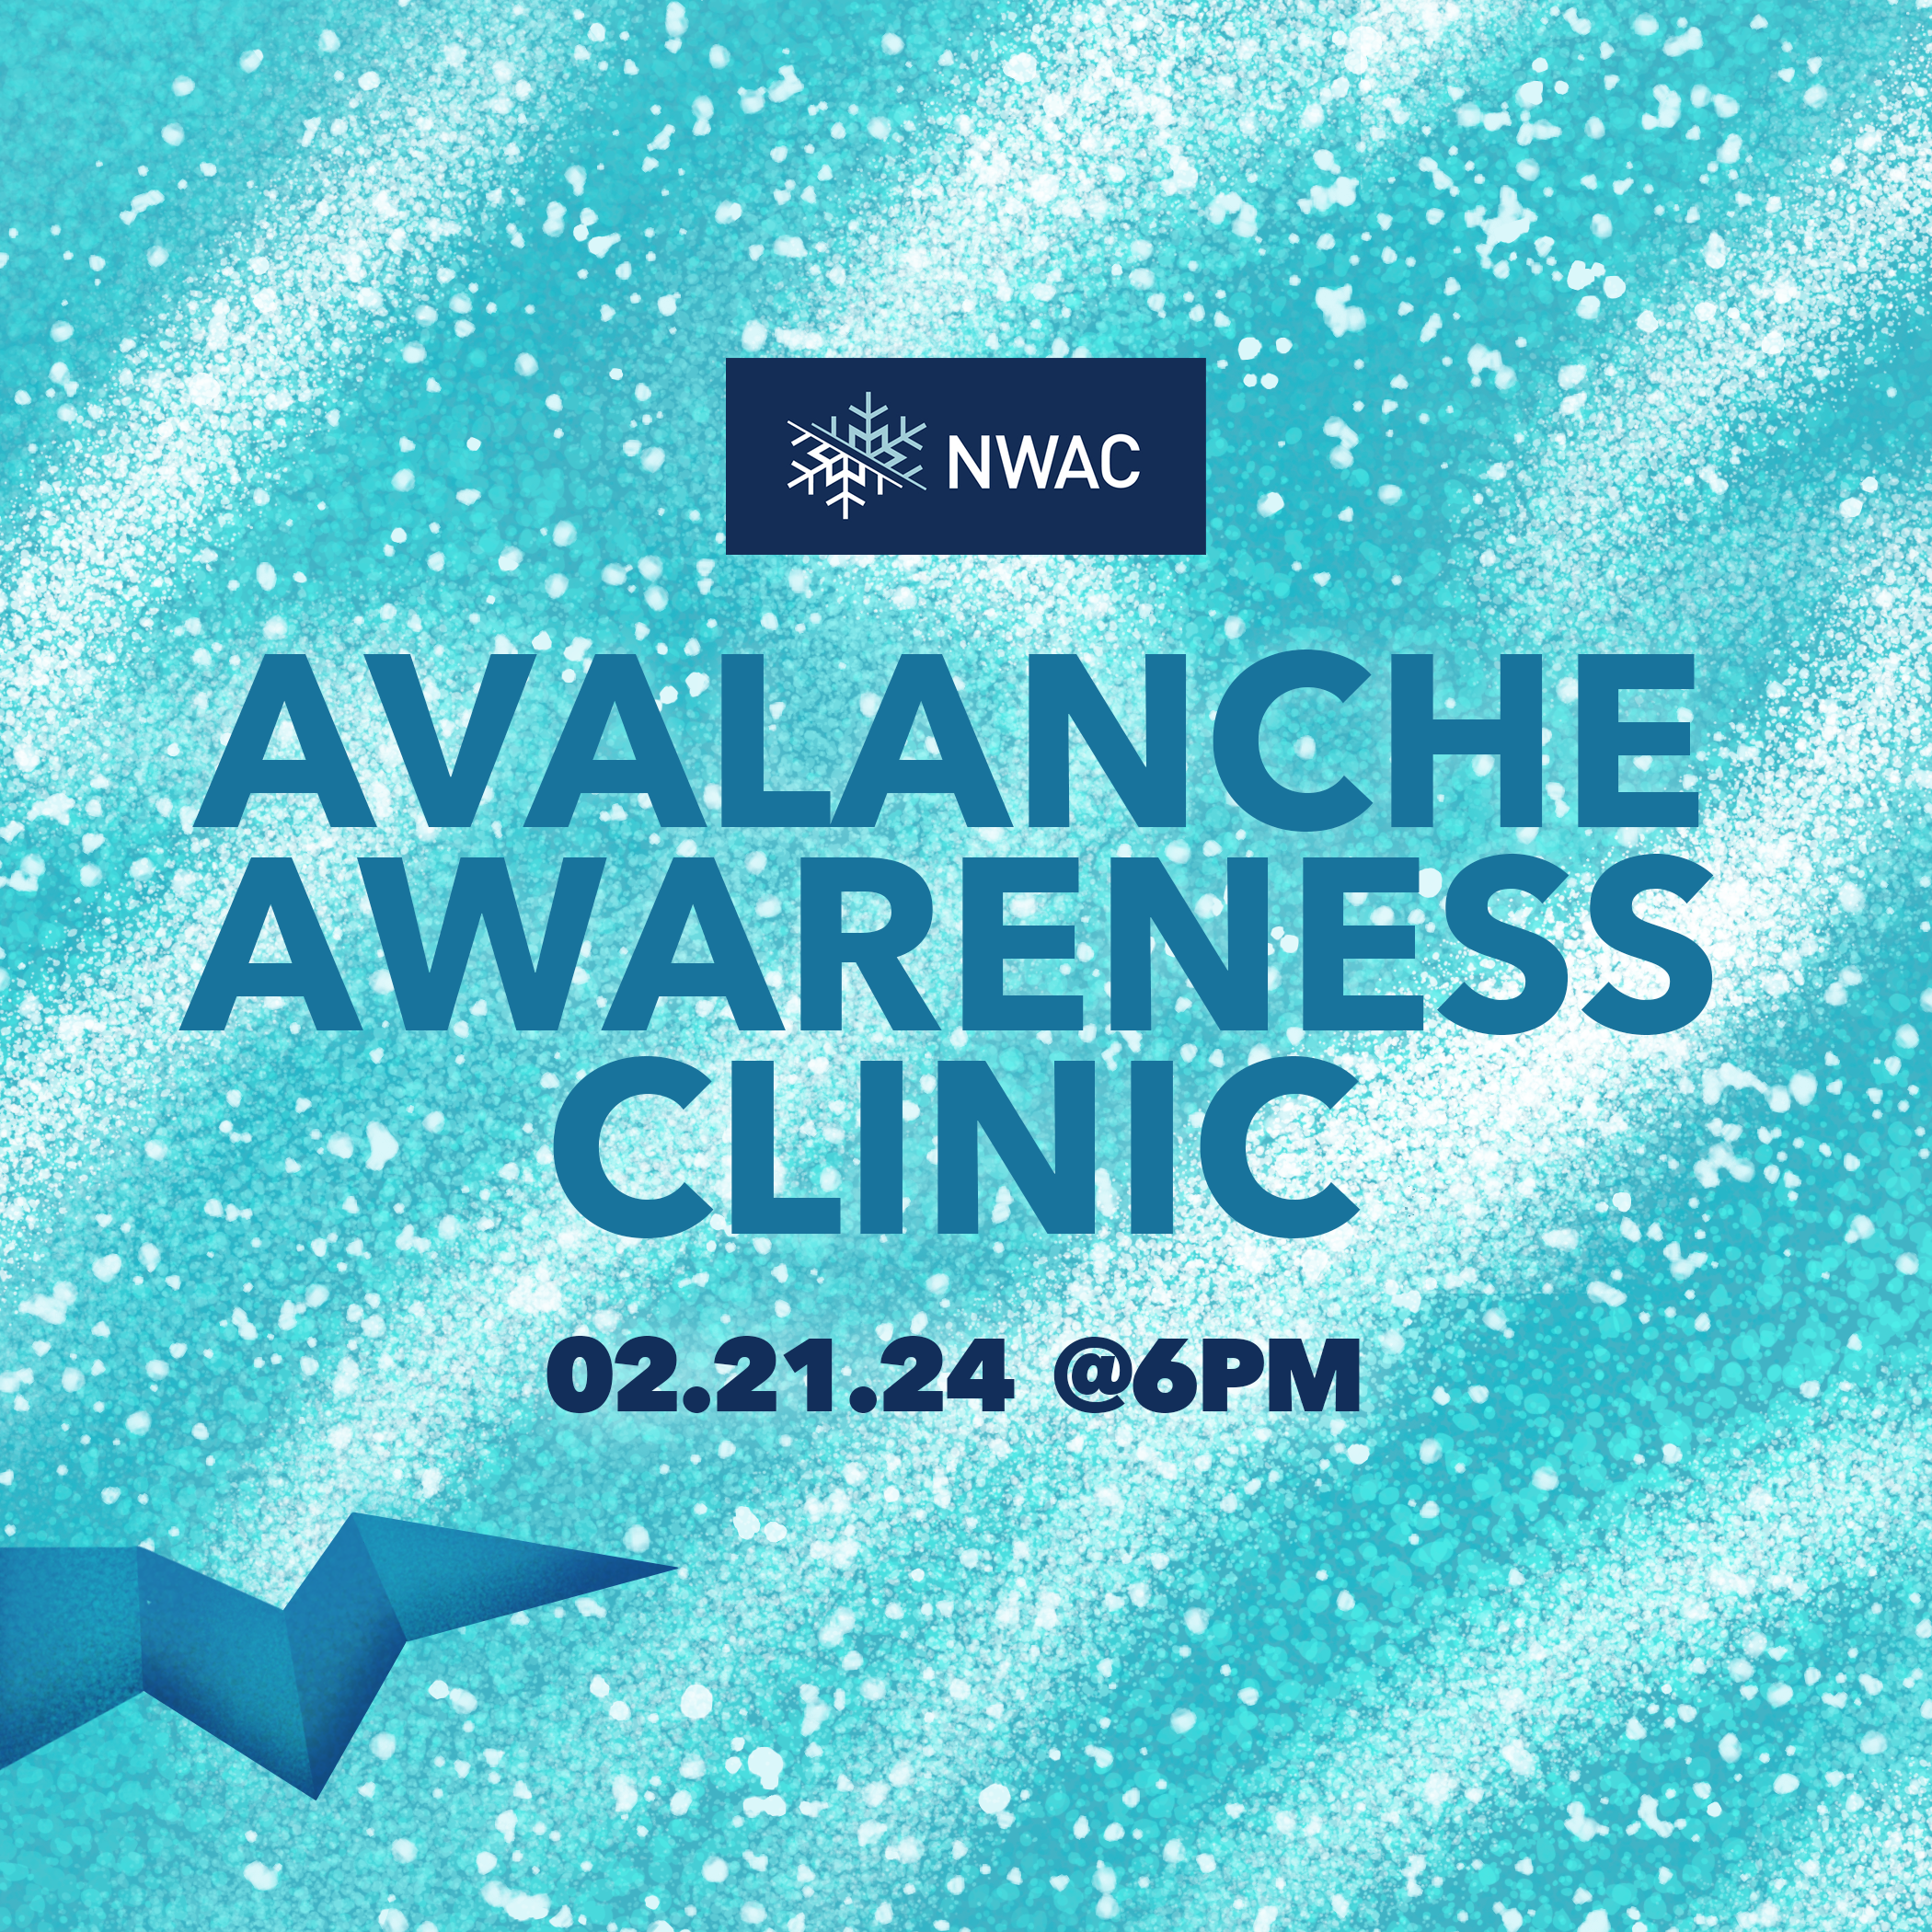 February Avalanche Awareness Clinic with NWAC